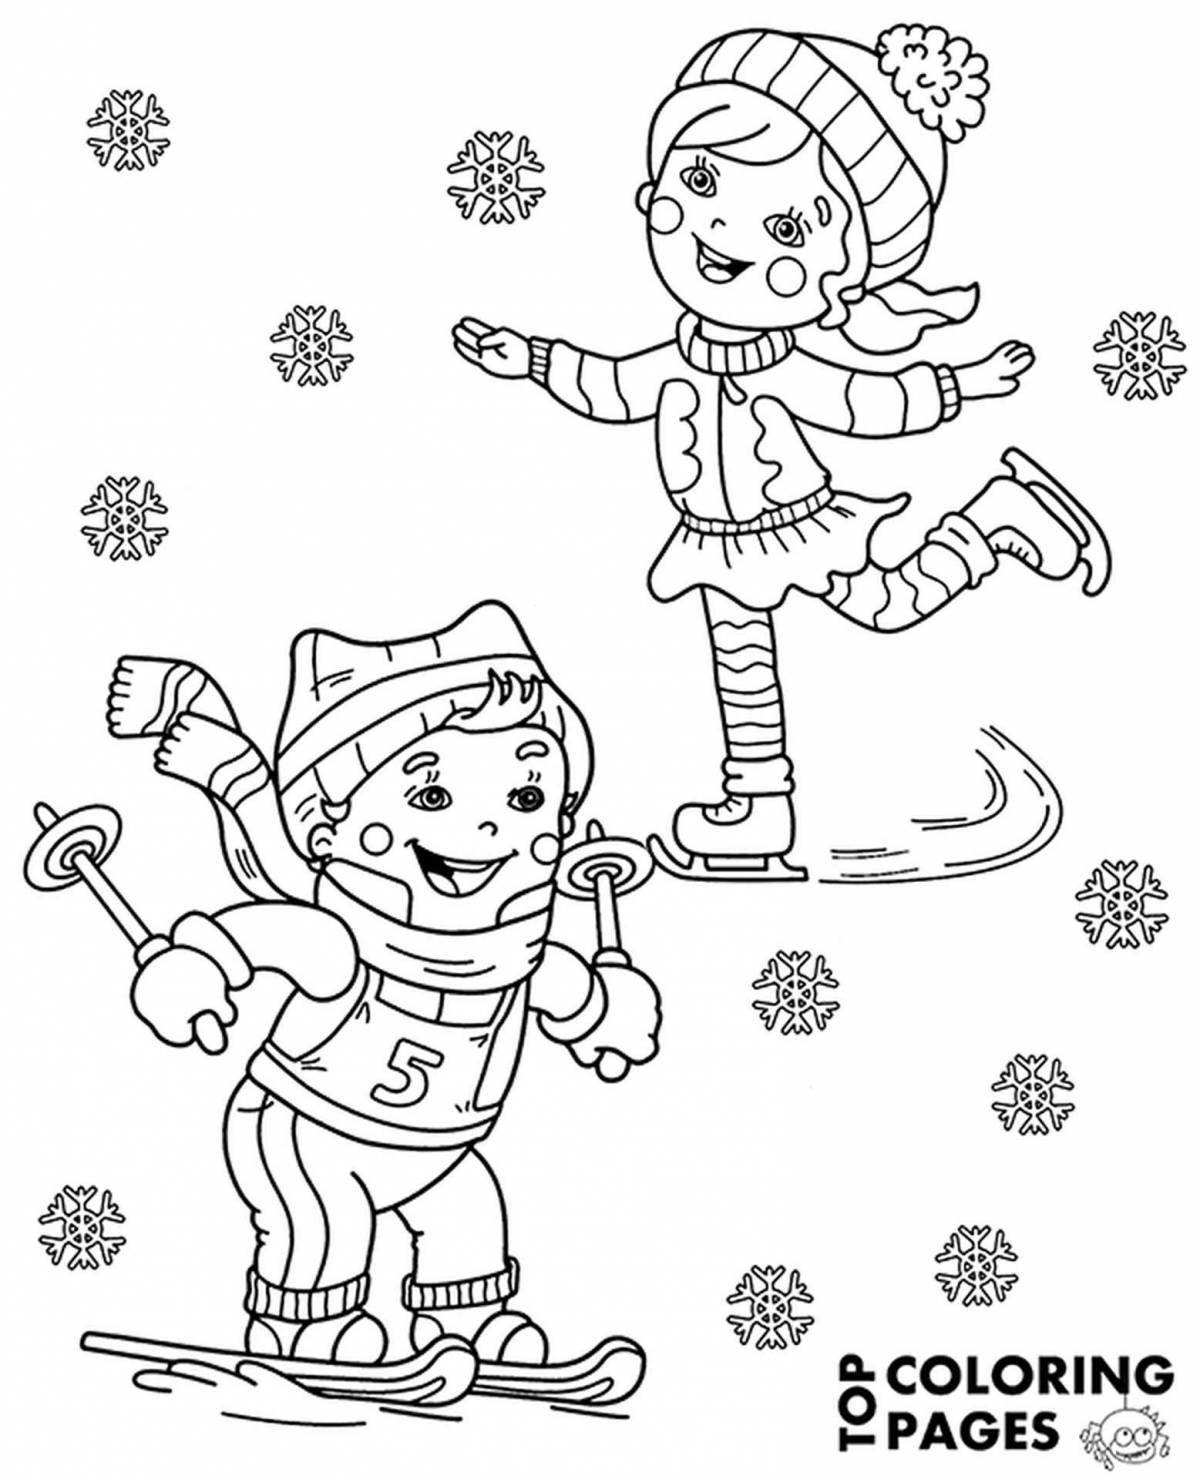 Great winter sports coloring page